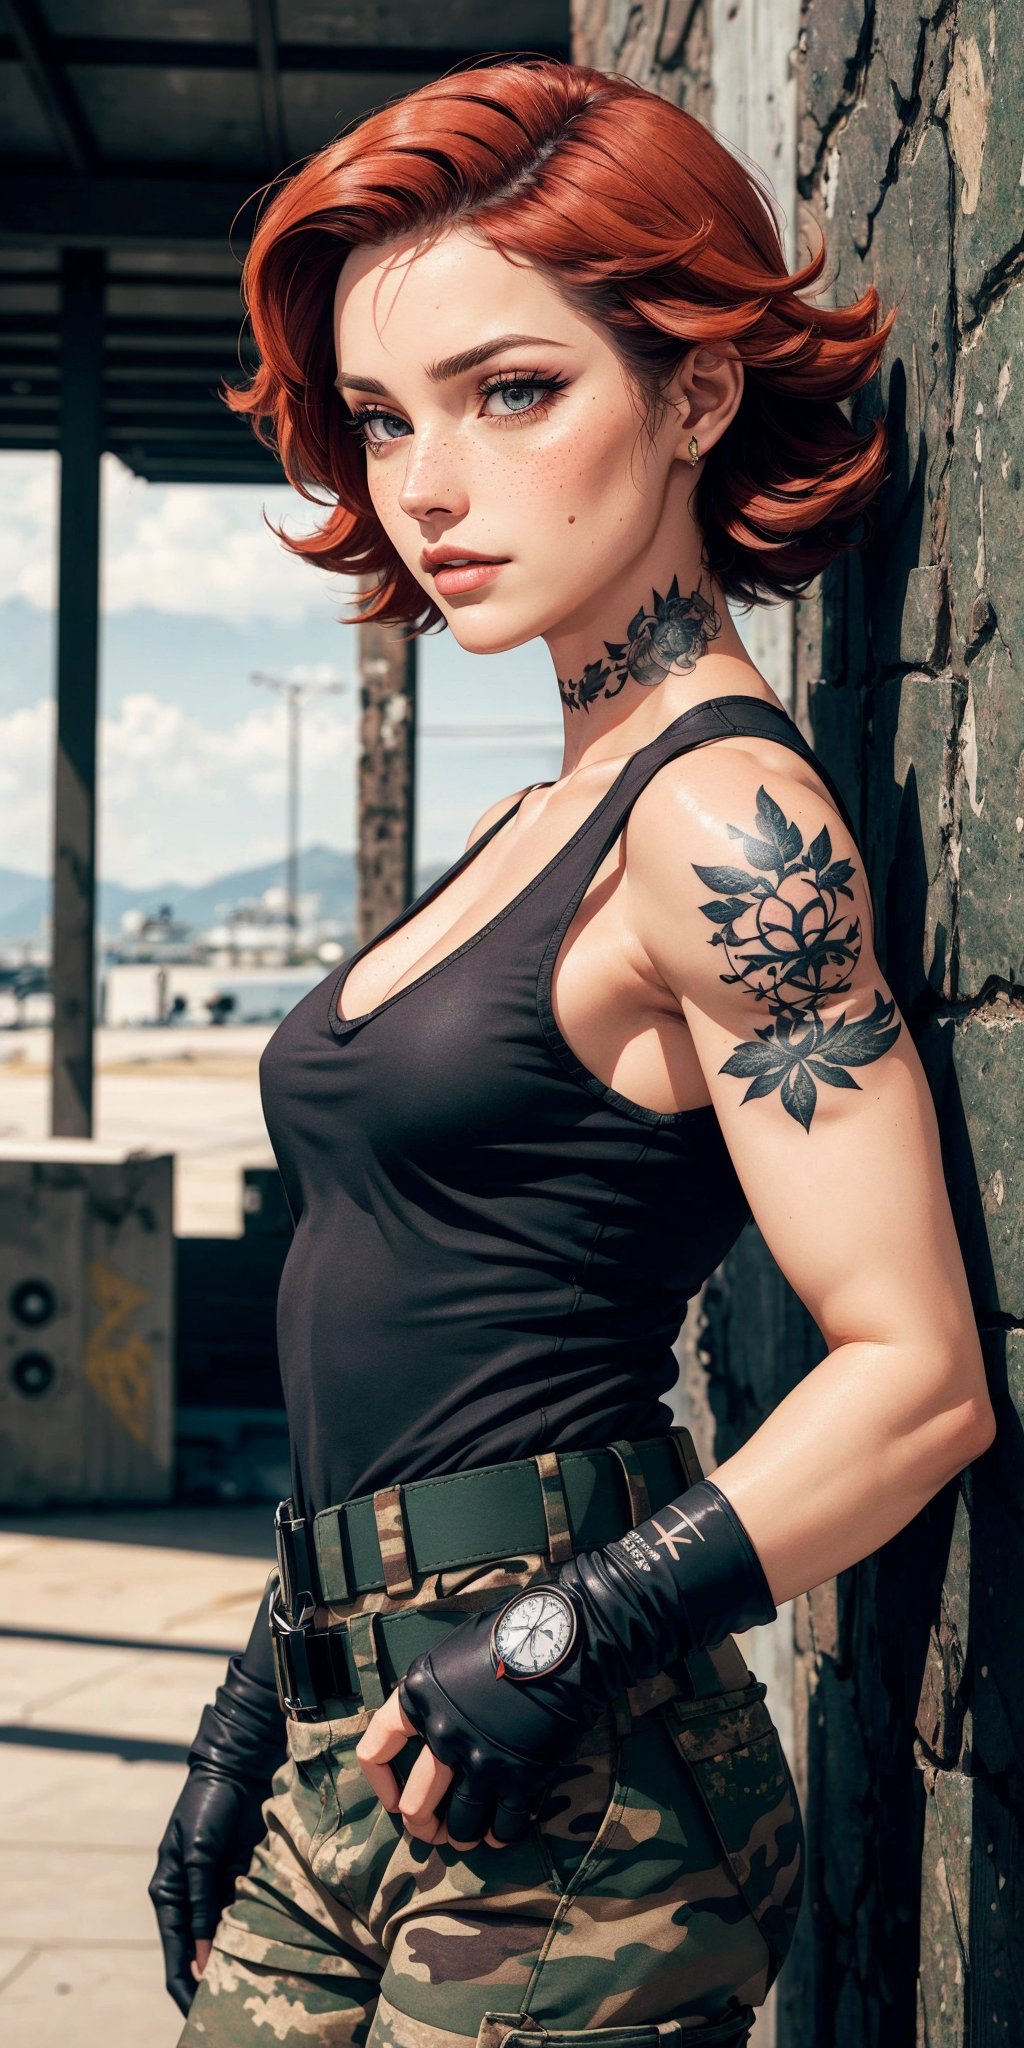 masterpiece,best quality,High quality,meryl, red hair, picture perfect face,blush, freckles,makeup,long eyelashes, perfect female body, black tank top,belt, camouflage pants, fingerless gloves,
military arm tattoo, dogtag,
military base, 